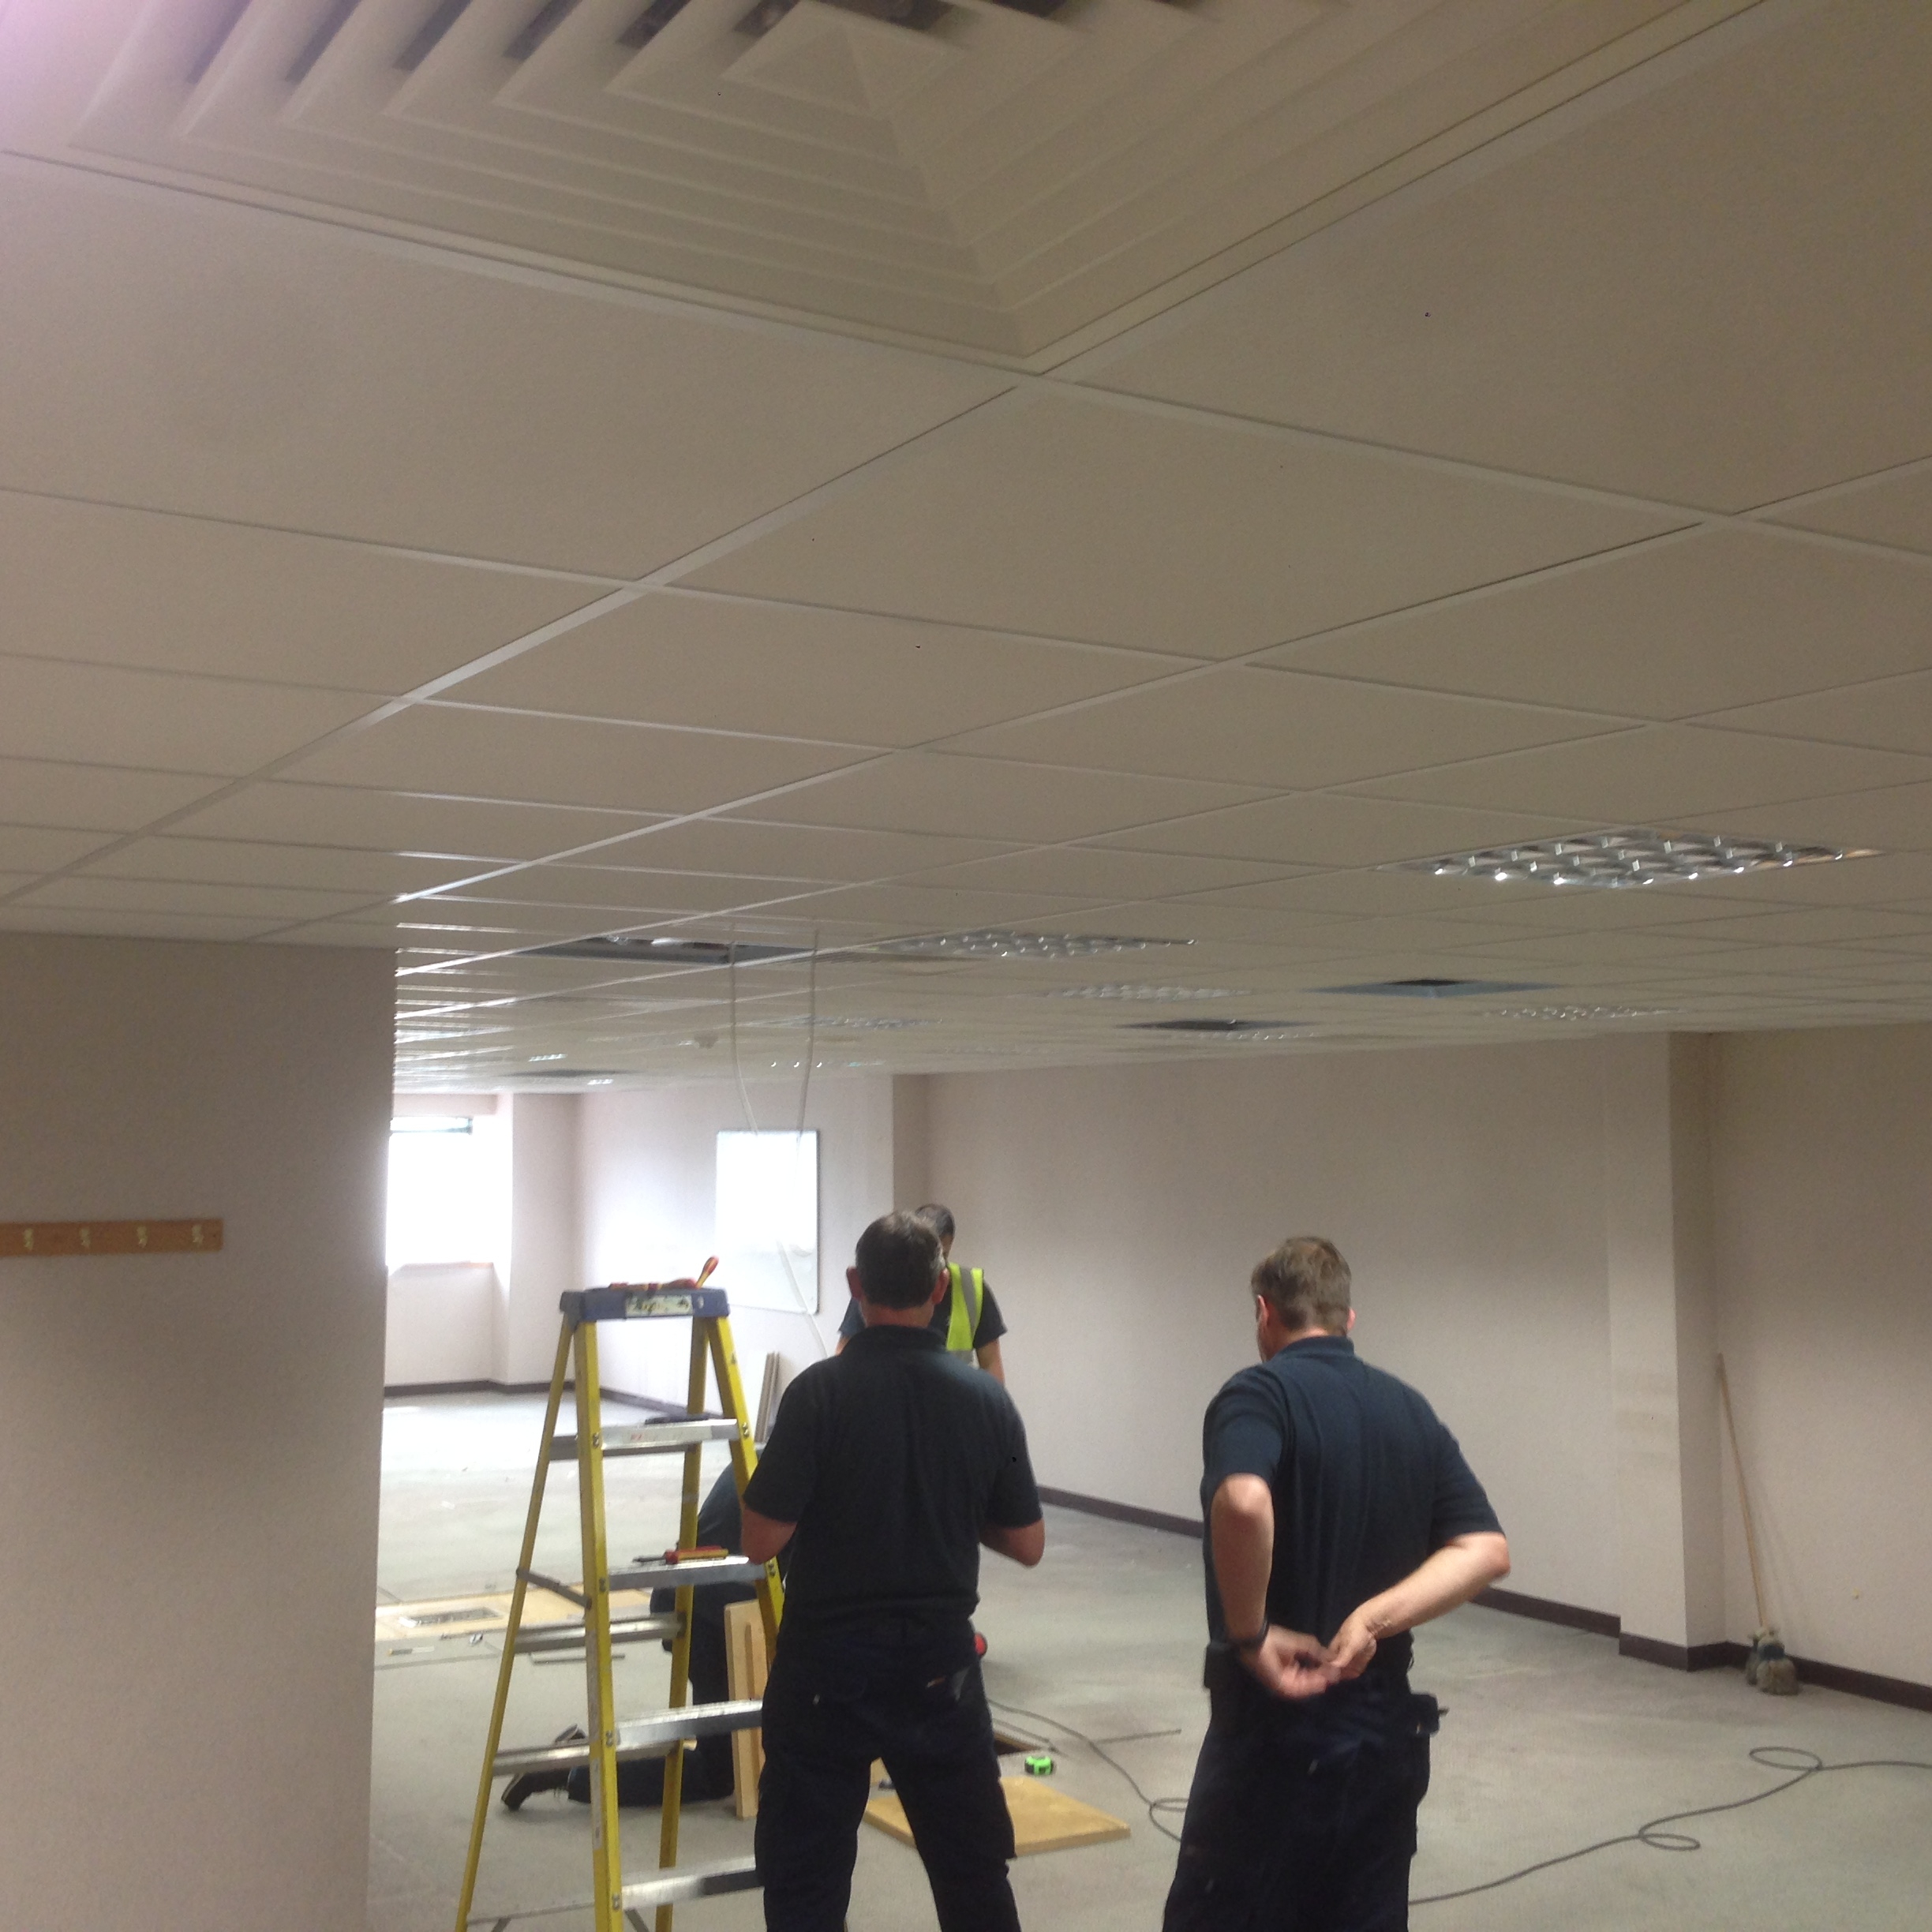 fixing your office ceiling with ceiling tiles that have good acoustic properties and sound absorption which are a hugely popular choice for office spaces